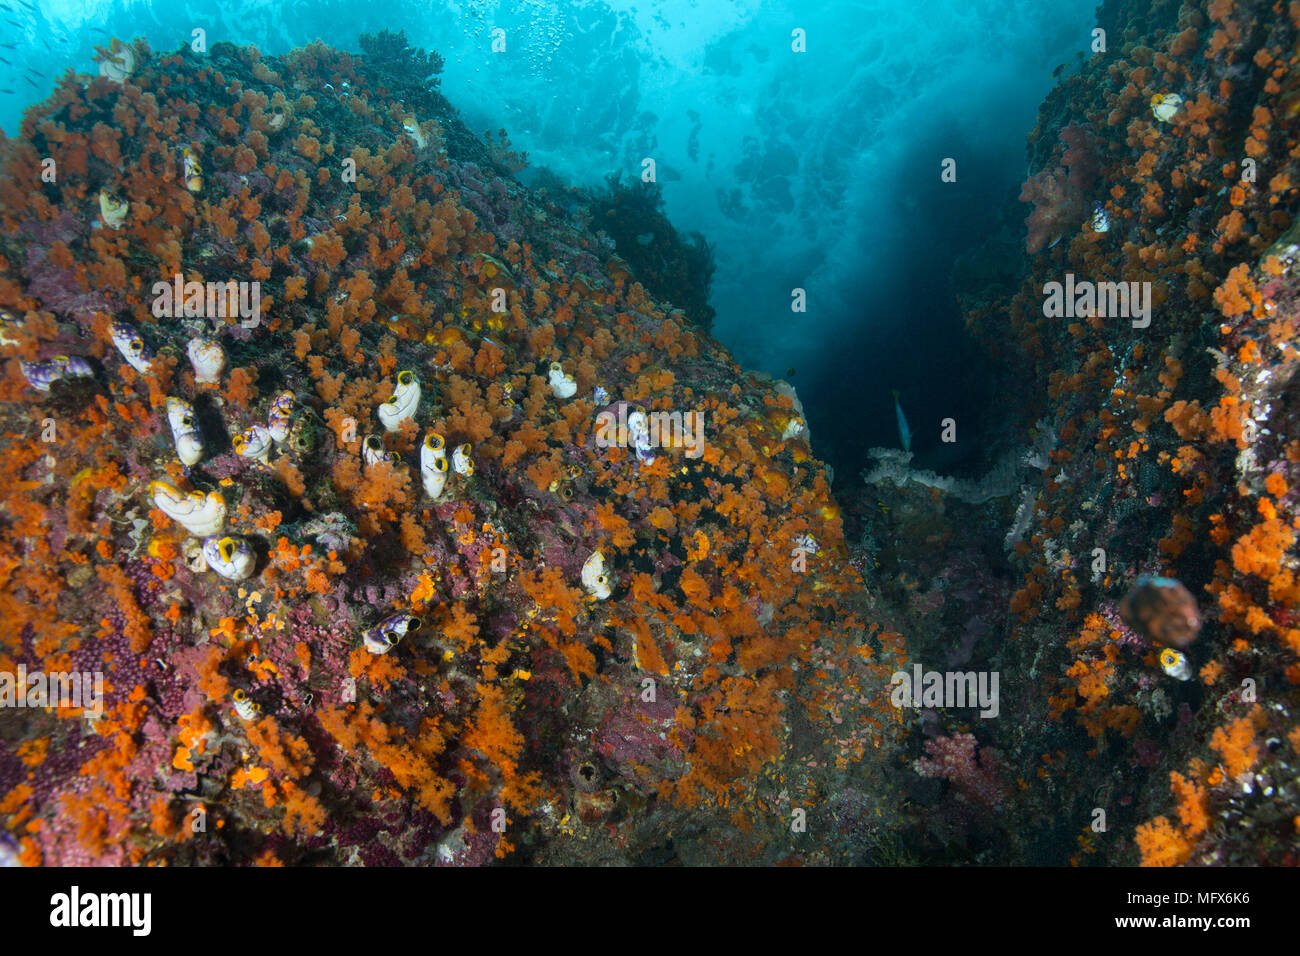 Colony Flower Tree Coral (Scleronephthya sp.). Riot of colors of underwater world.  Picture was taken in the Ceram sea, Raja Ampat, Papua, Indonesia Stock Photo